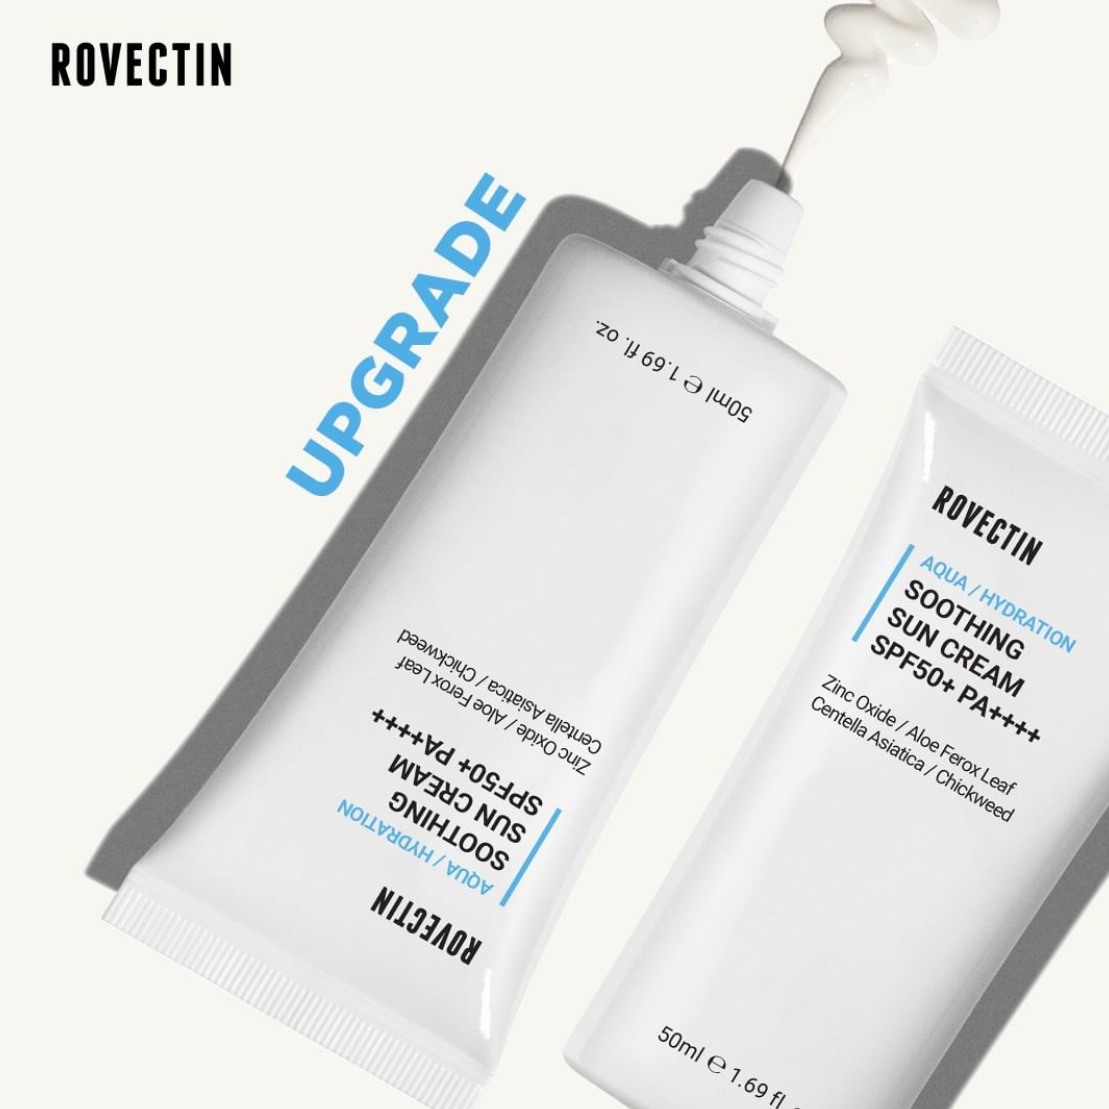 ROVECTIN Soothing Sun Cream SPF 50+ 50ml on sales on our Website !